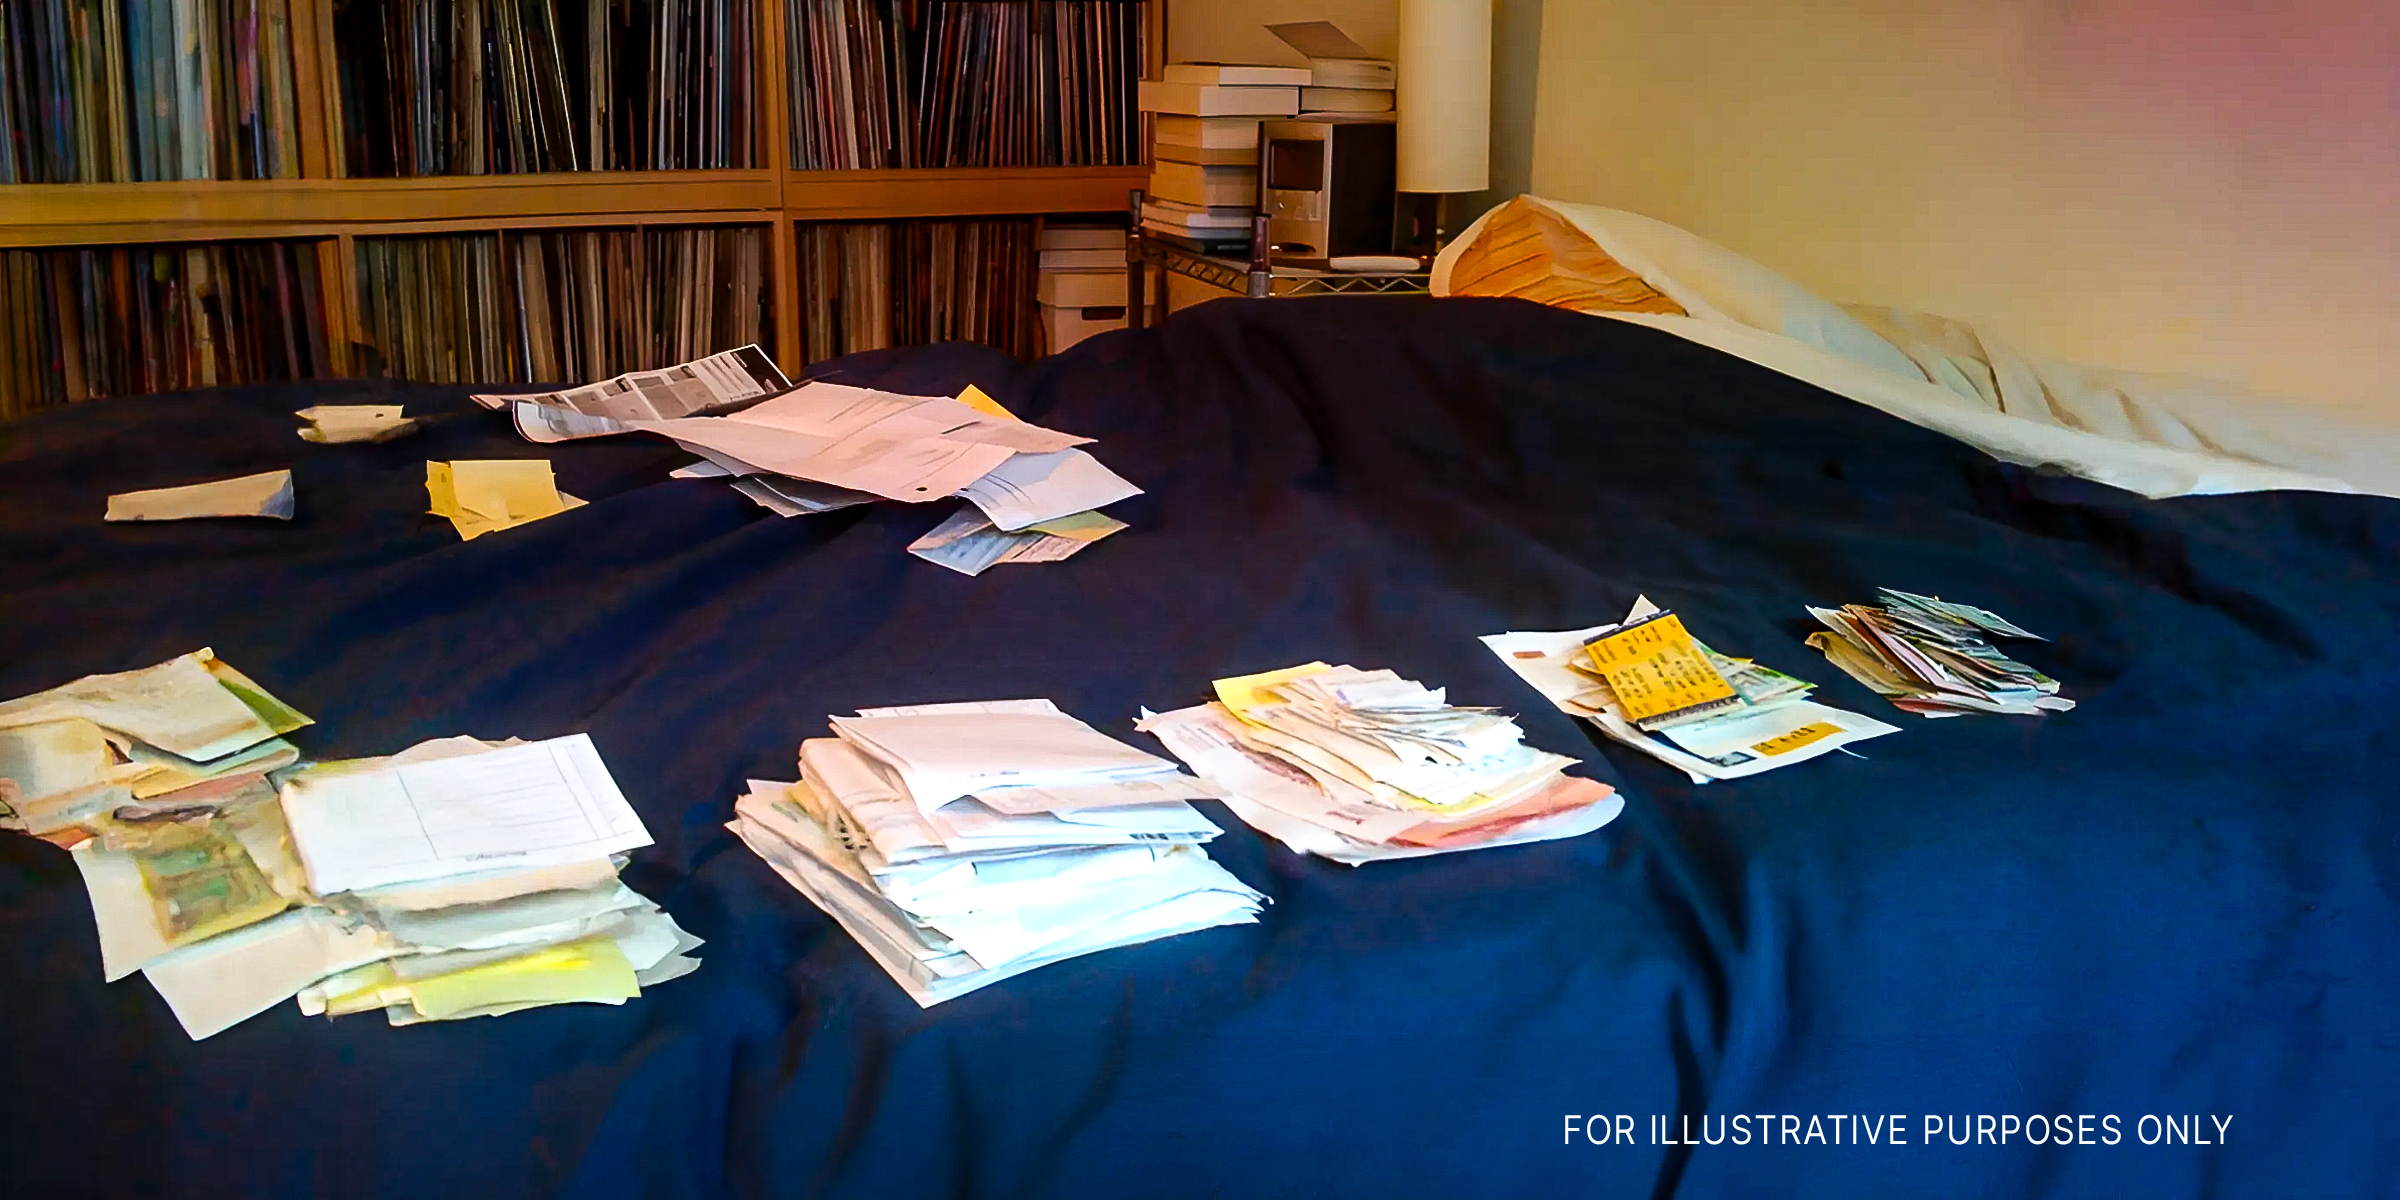 Piles of receipts on a bed | Source: flickr.com/CousinJacob/CC BY-SA 2.0